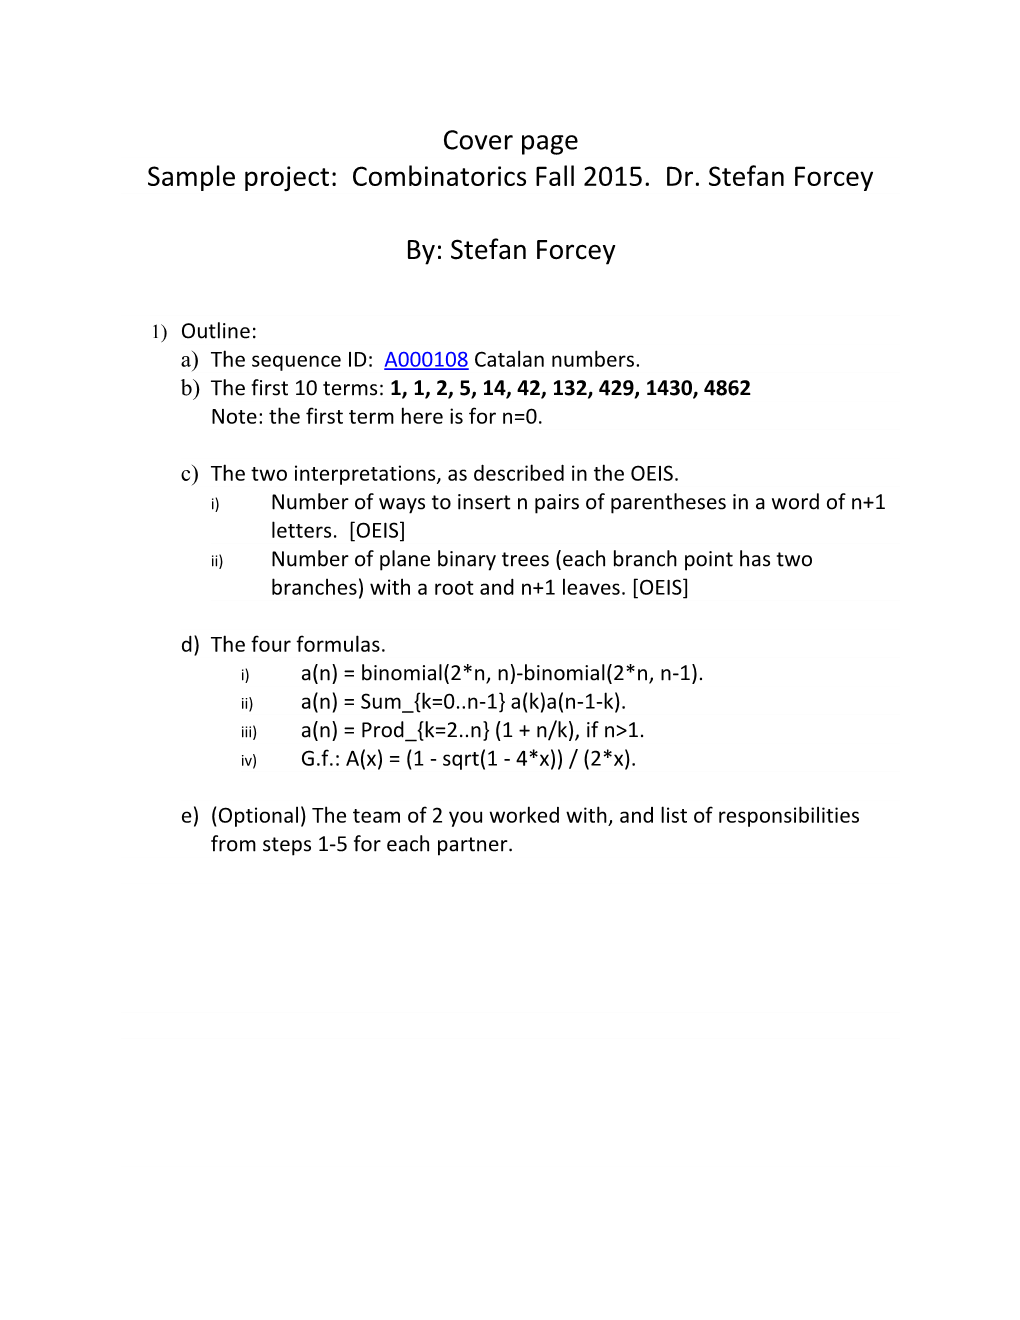 Sample Project: Combinatorics Fall 2015. Dr. Stefan Forcey